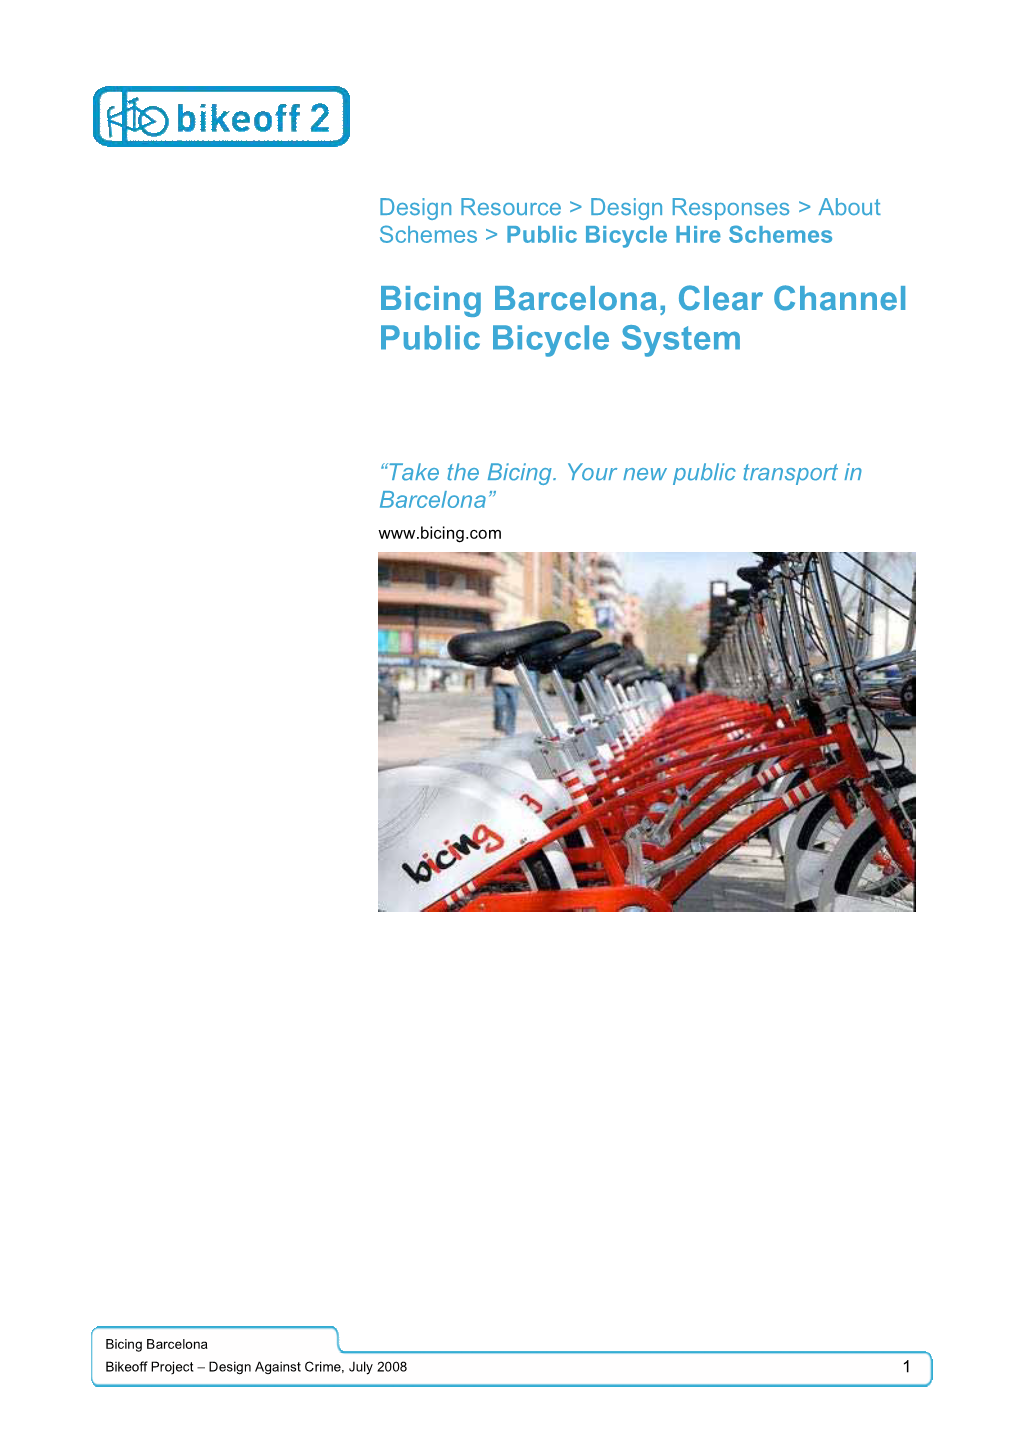 Bicing Barcelona, Clear Channel Public Bicycle System